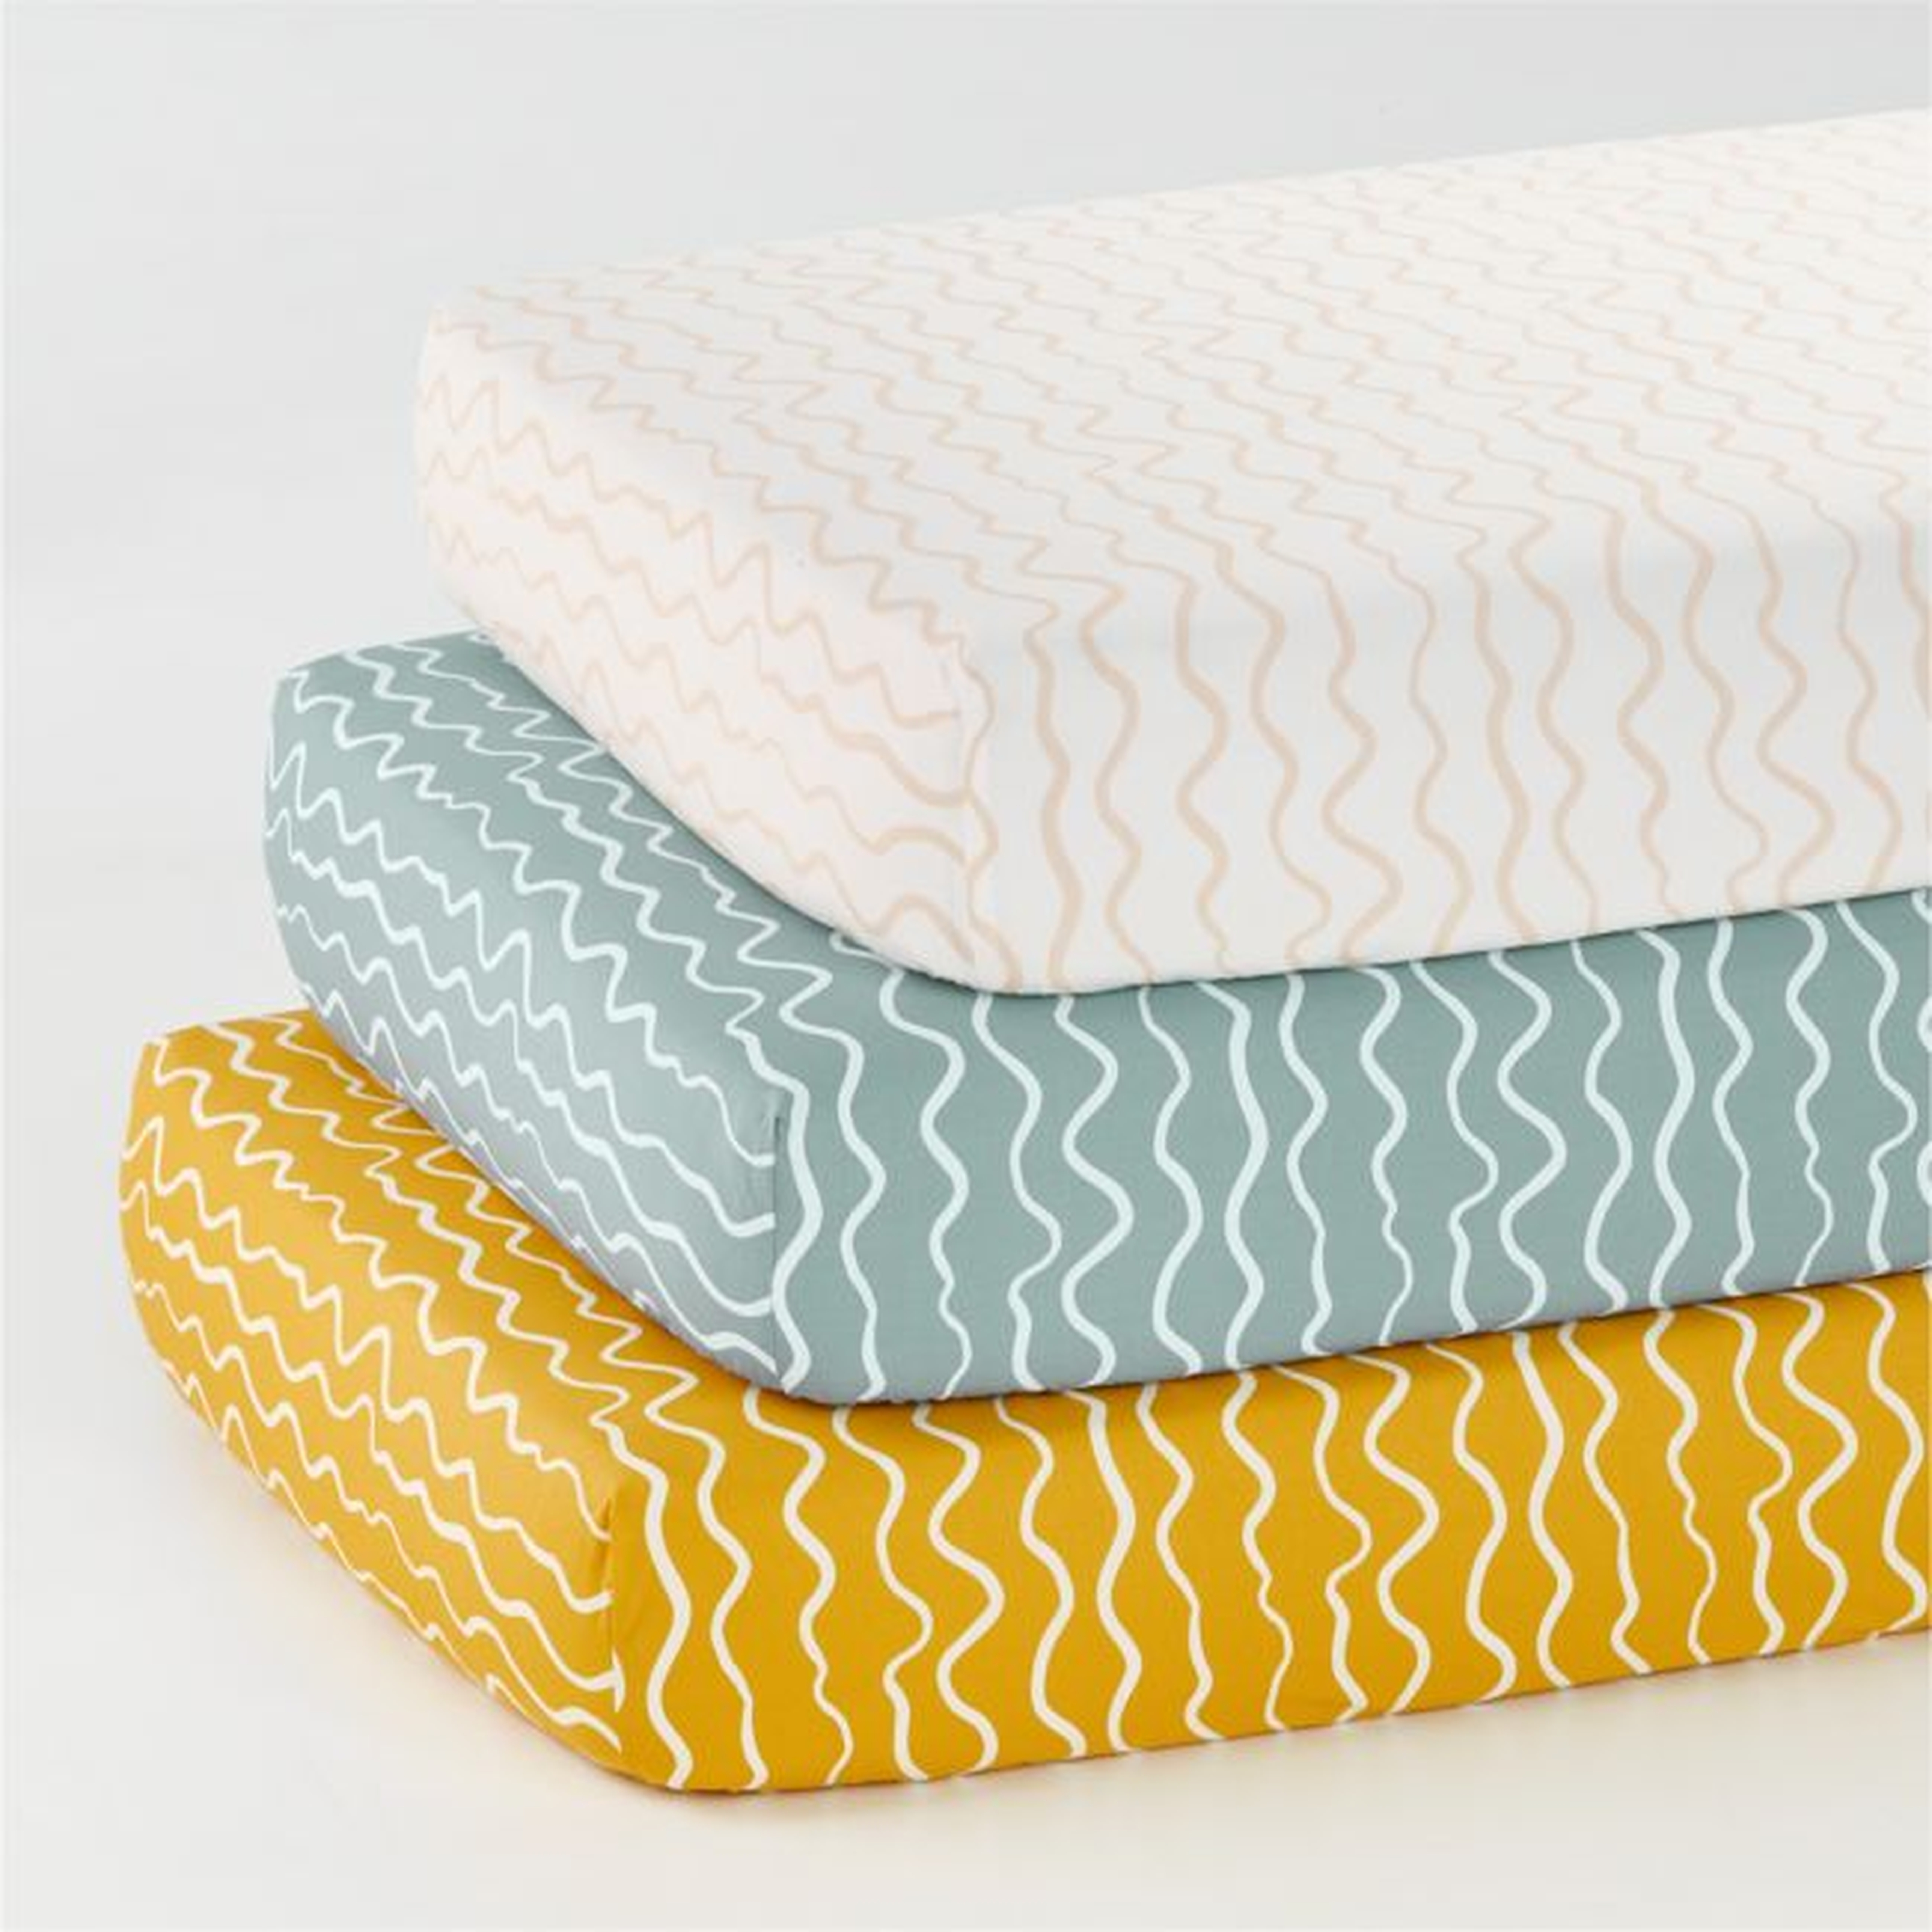 Imperfect Stripe Crib Fitted Sheet, Set of 3 - Crate and Barrel